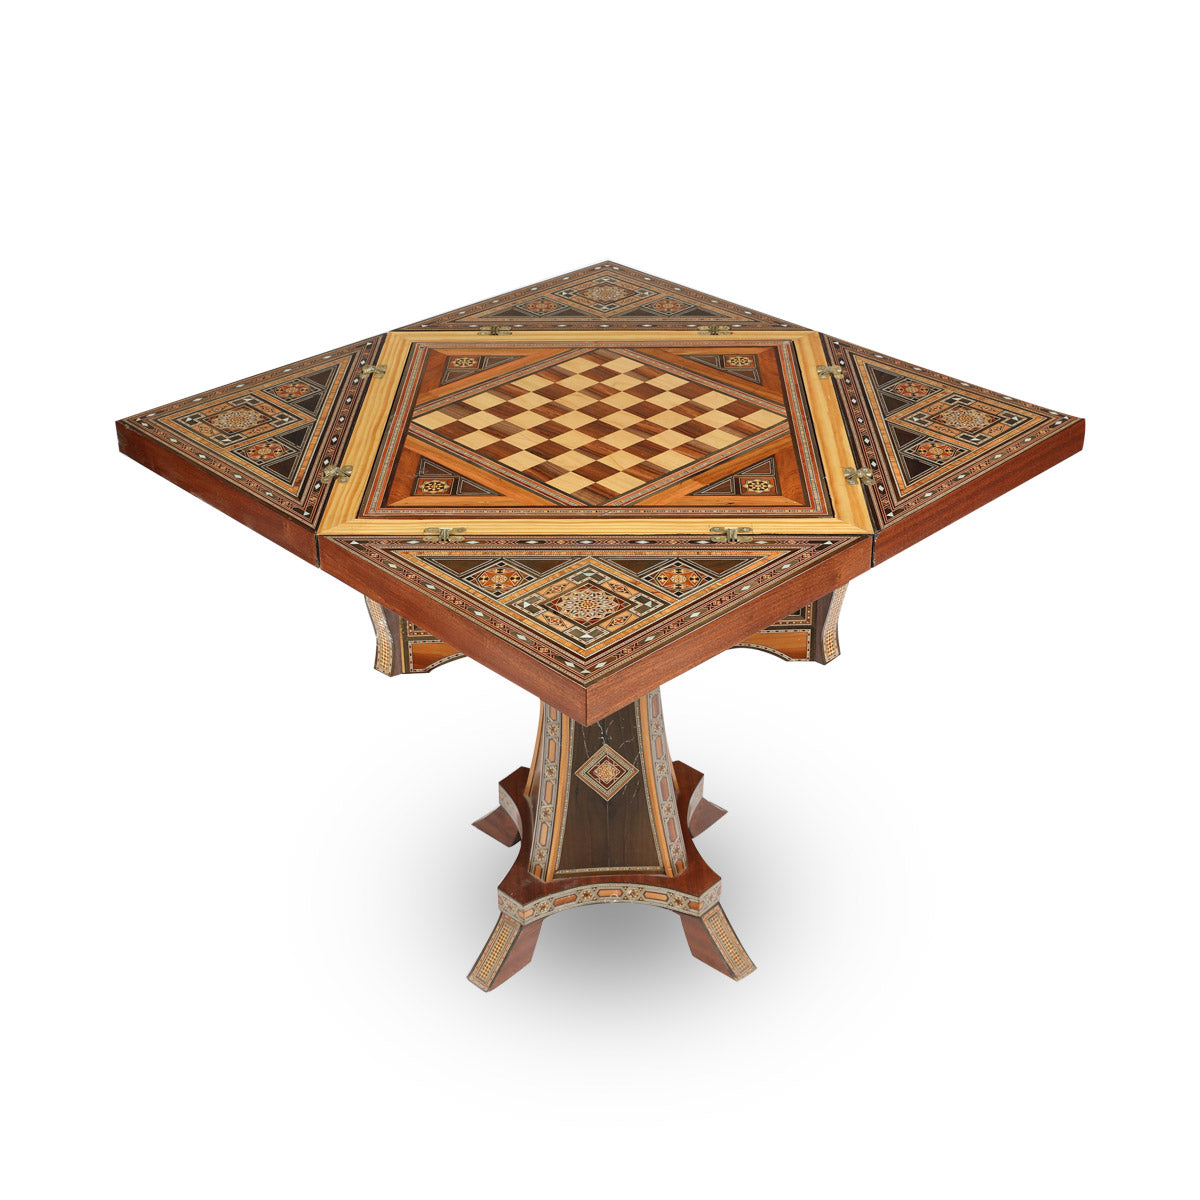 Mother of Pearls, Mixed Wood, Abalone & Marquetry Inlaid Multi-purpose Foldable Gaming Table